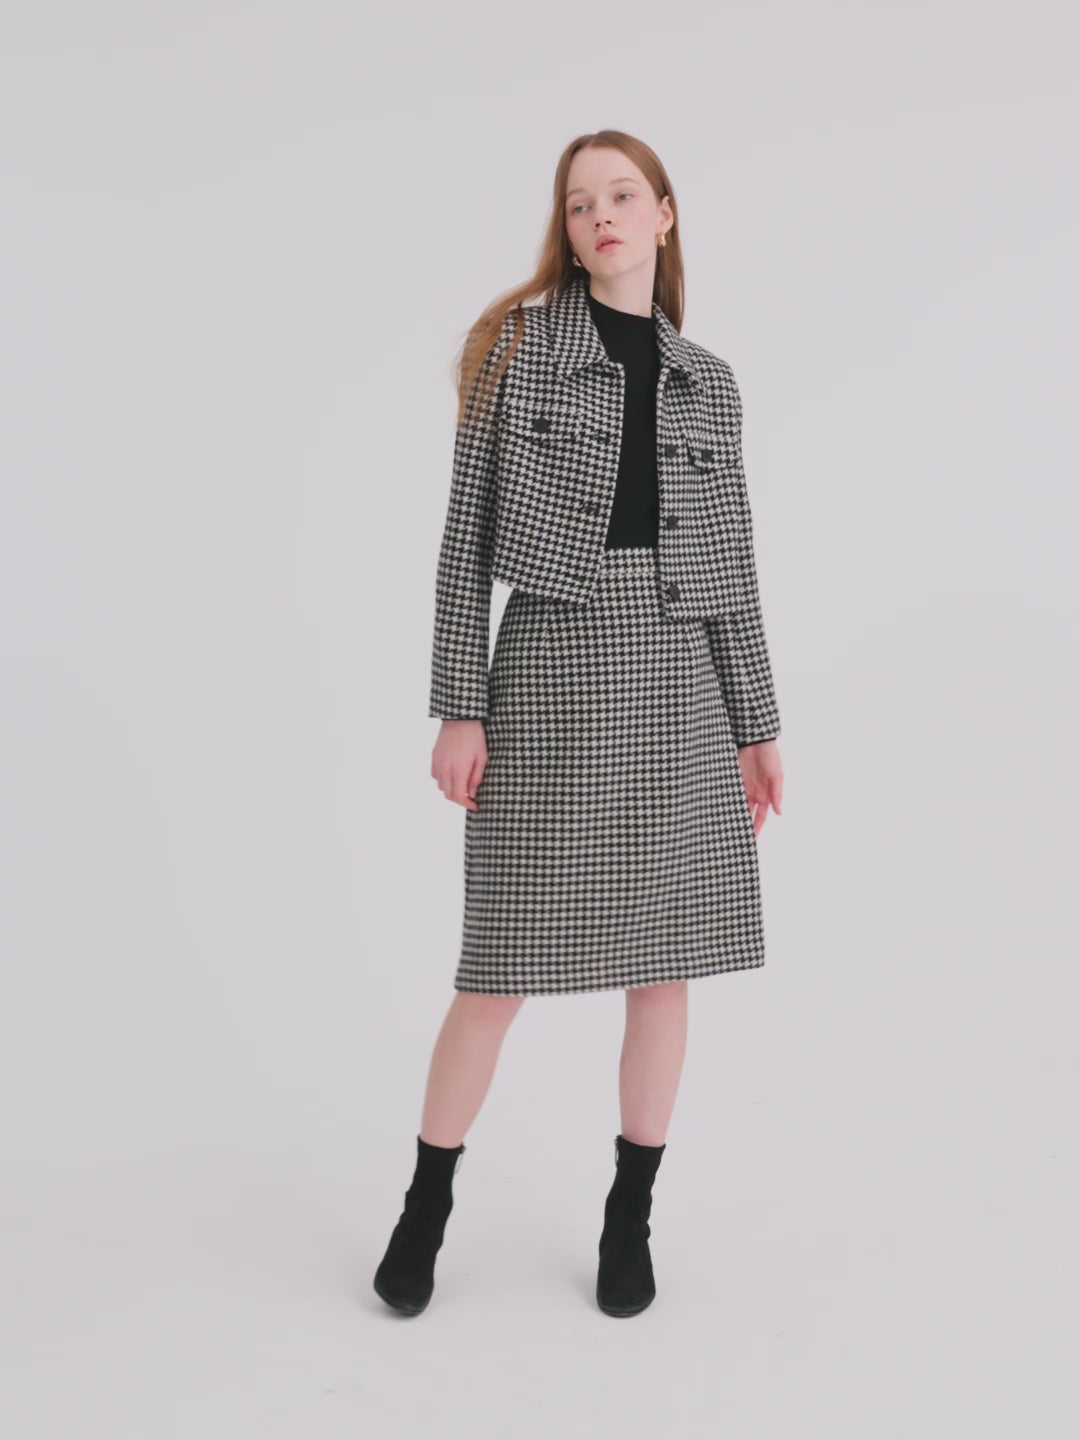 Houndstooth skirt suit with black boots and handbag. | Houndstooth skirt, Skirt  suit, Stylish outfits